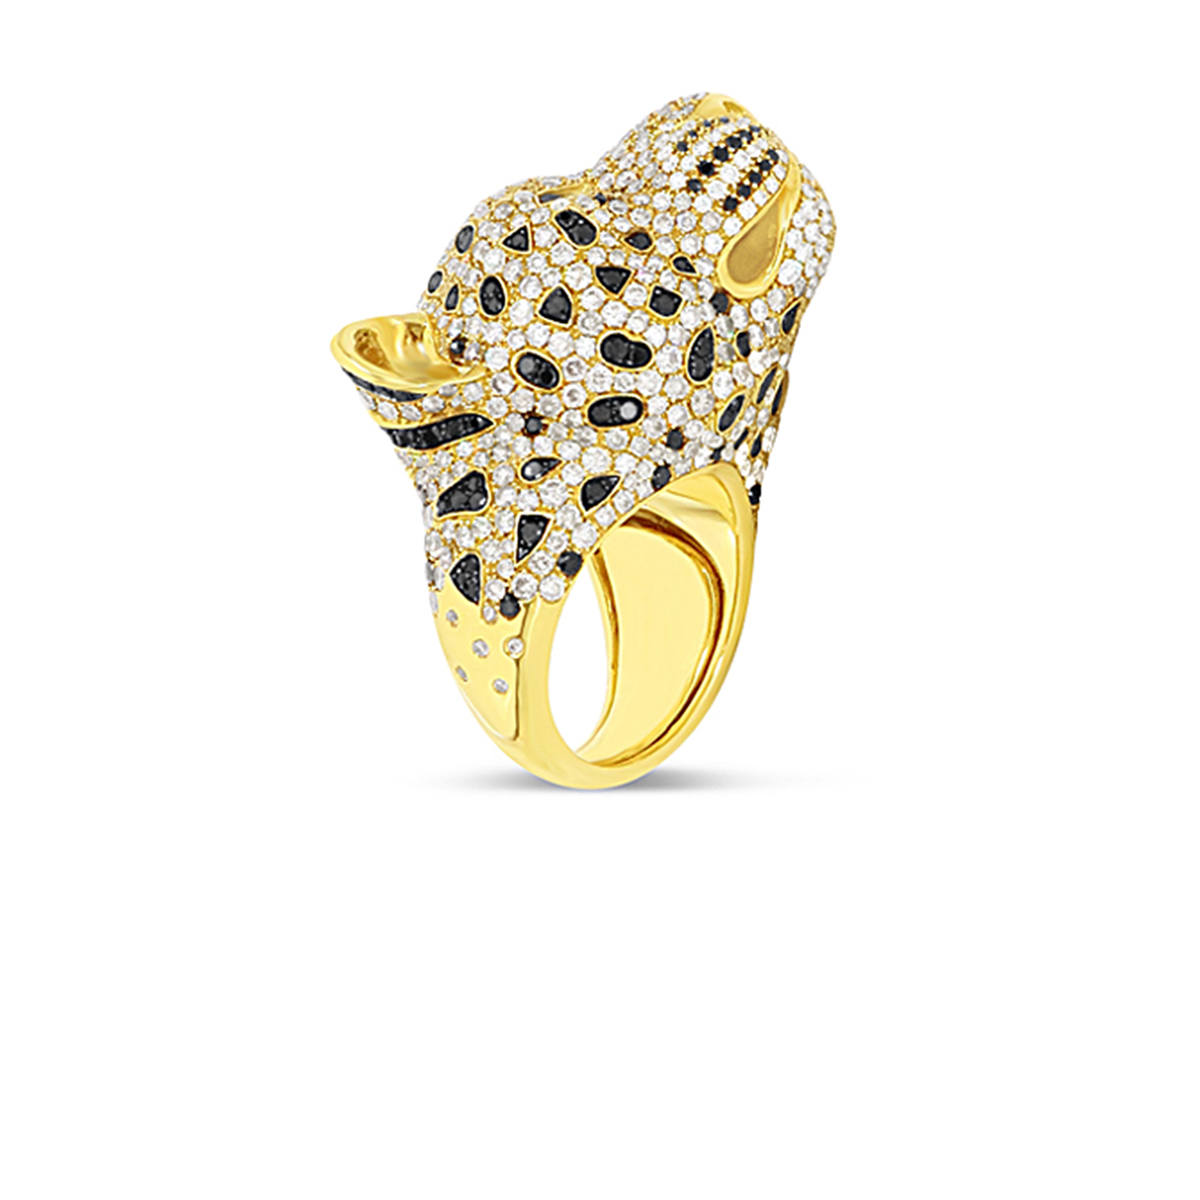 Leopard Cocktail Ring with diamonds and blue sapphires